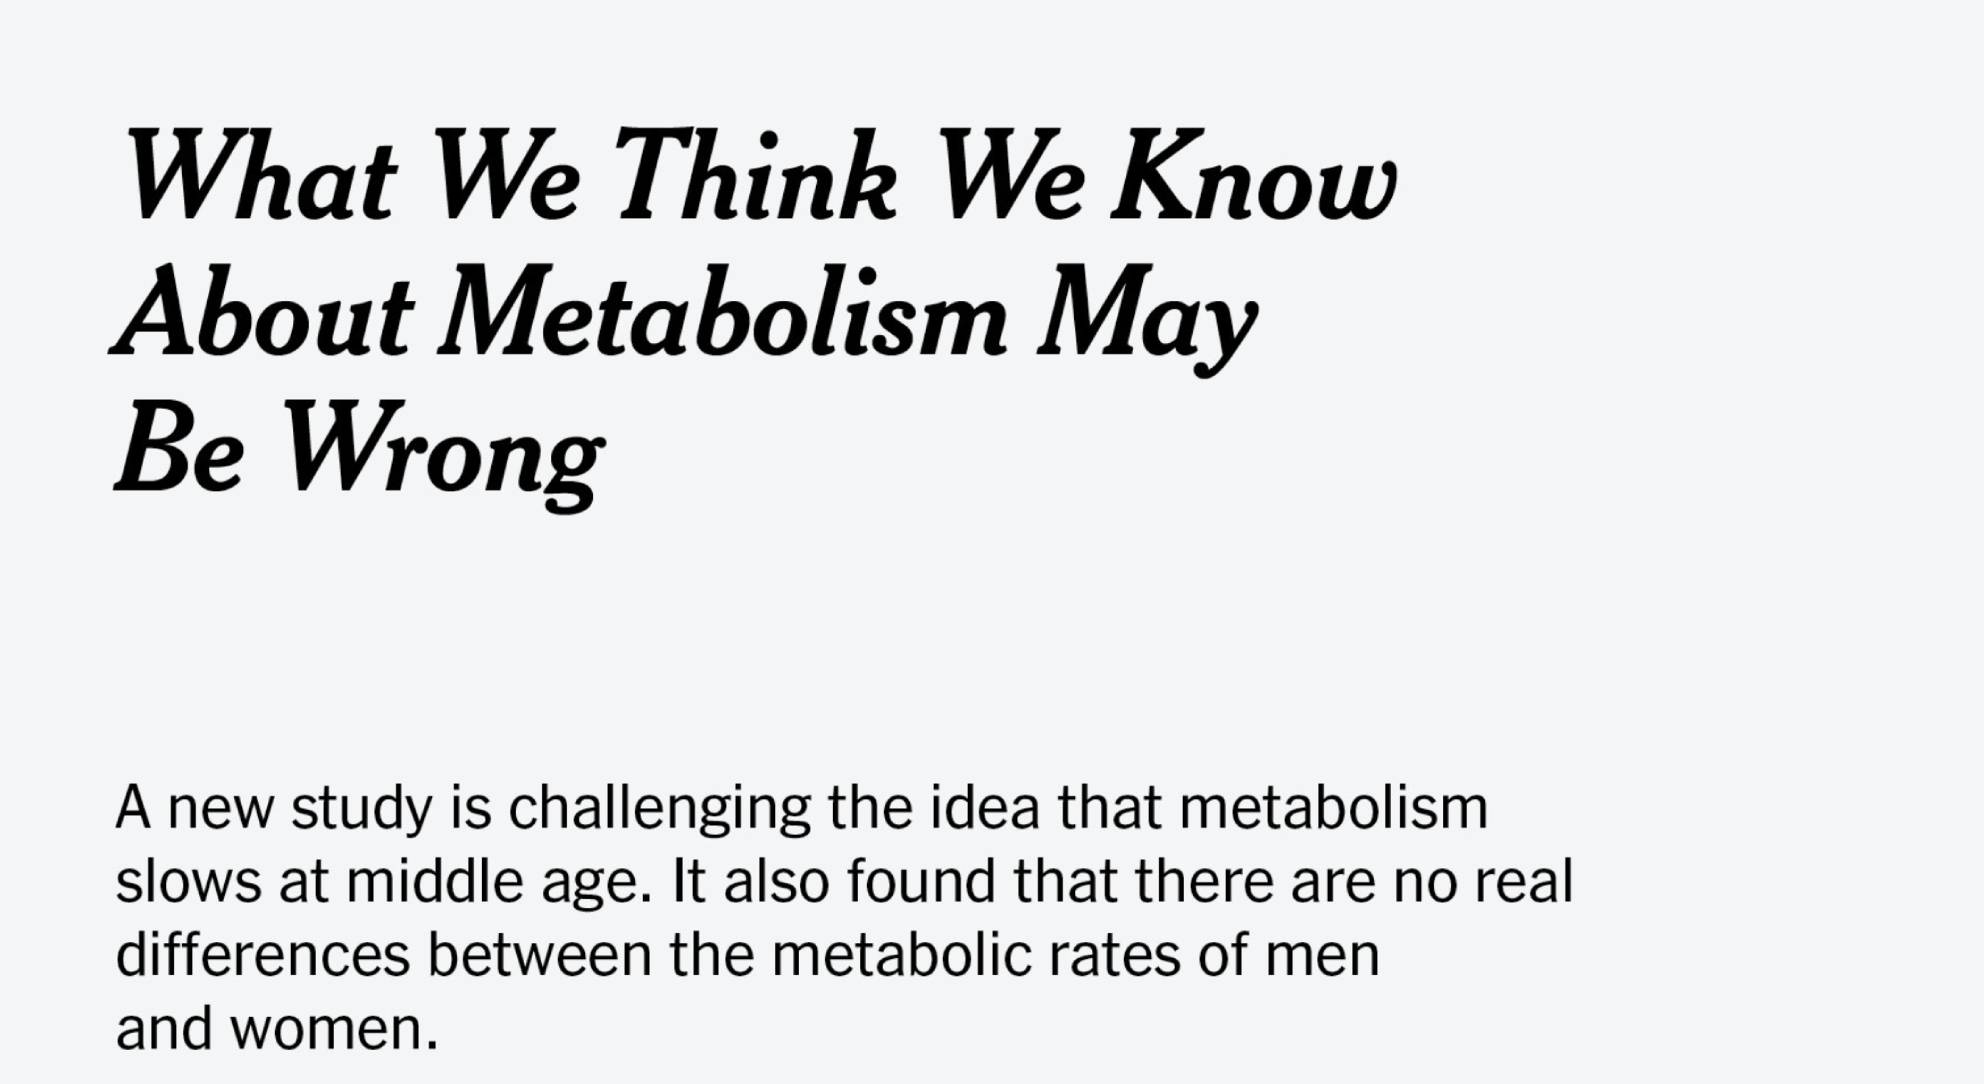 What We Think We Know About Metabolism May Be Wrong